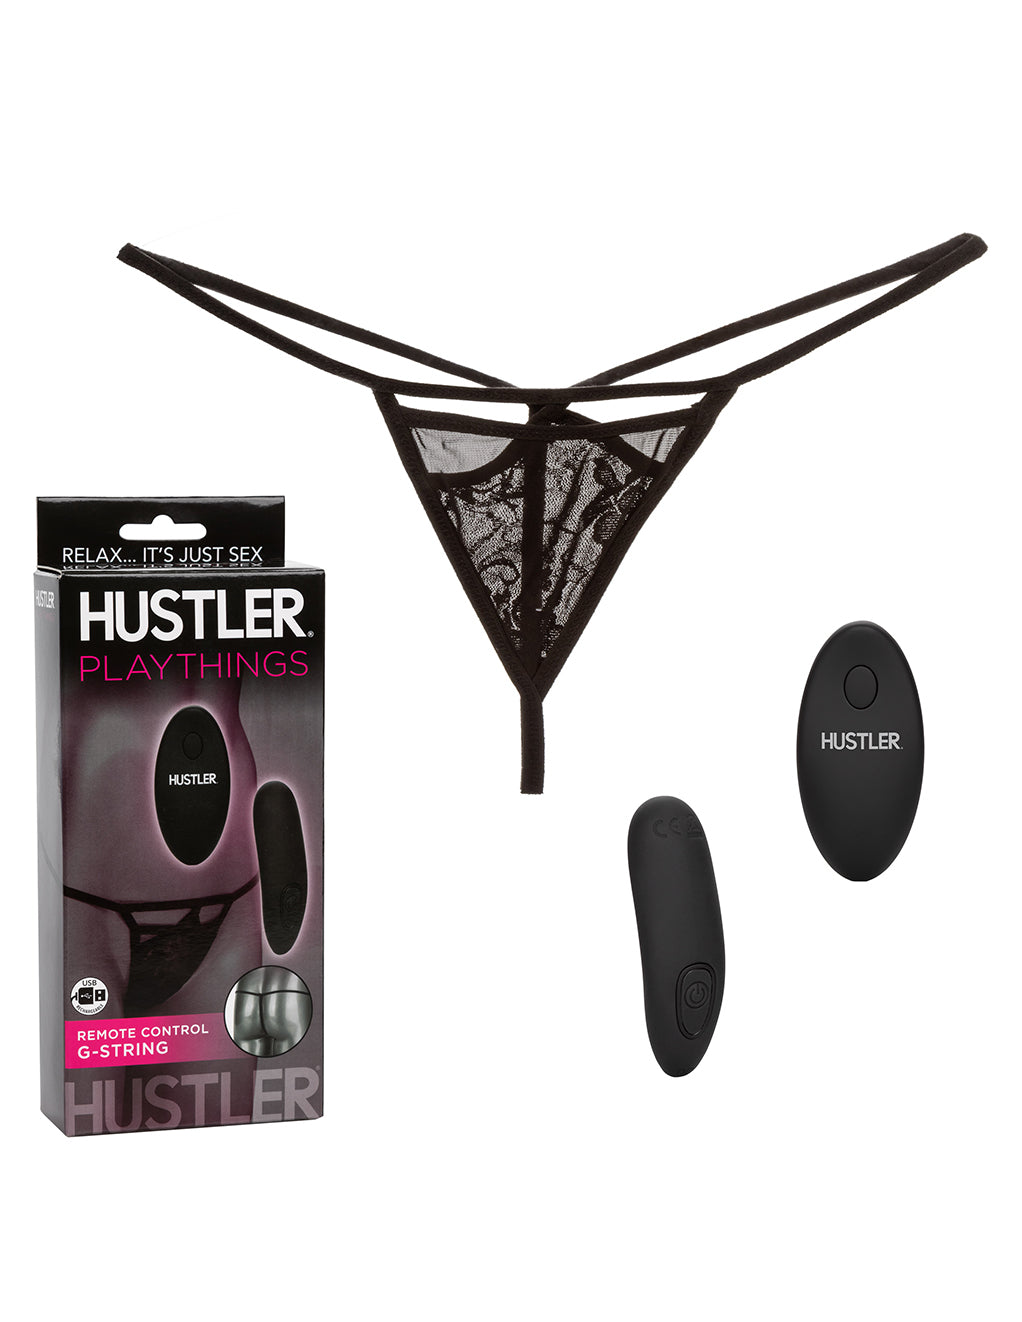 HUSTLER® Playthings Remote Control G-String- Package Contents